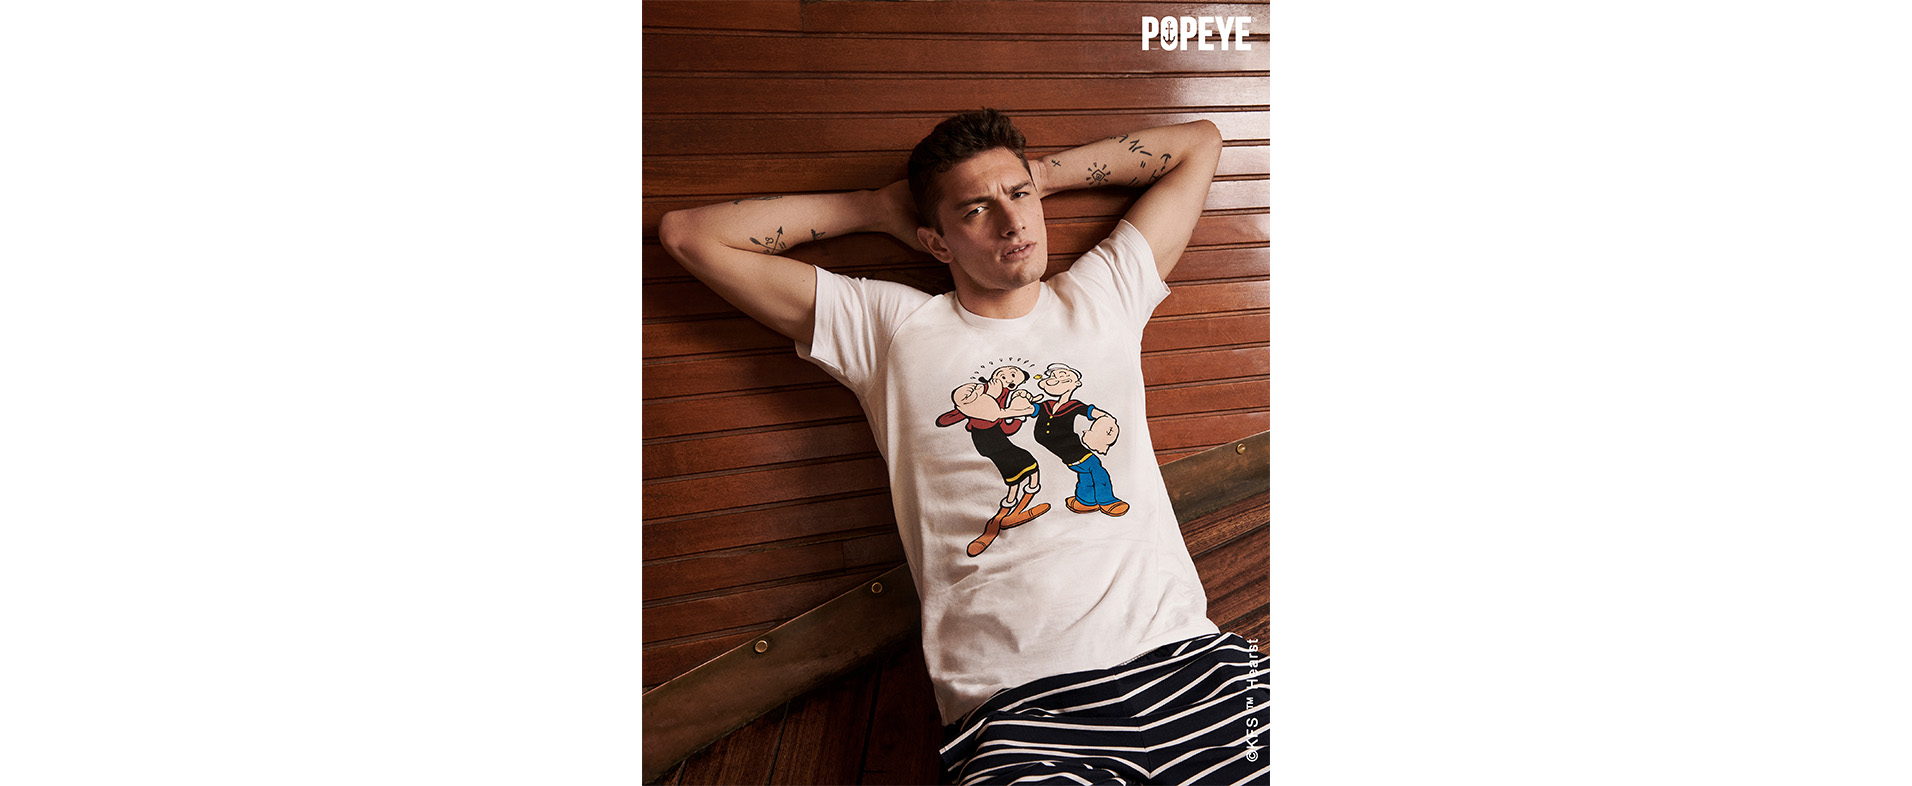 Popeye and Intimissimi Uomo Team Up For Spring/Summer 2022